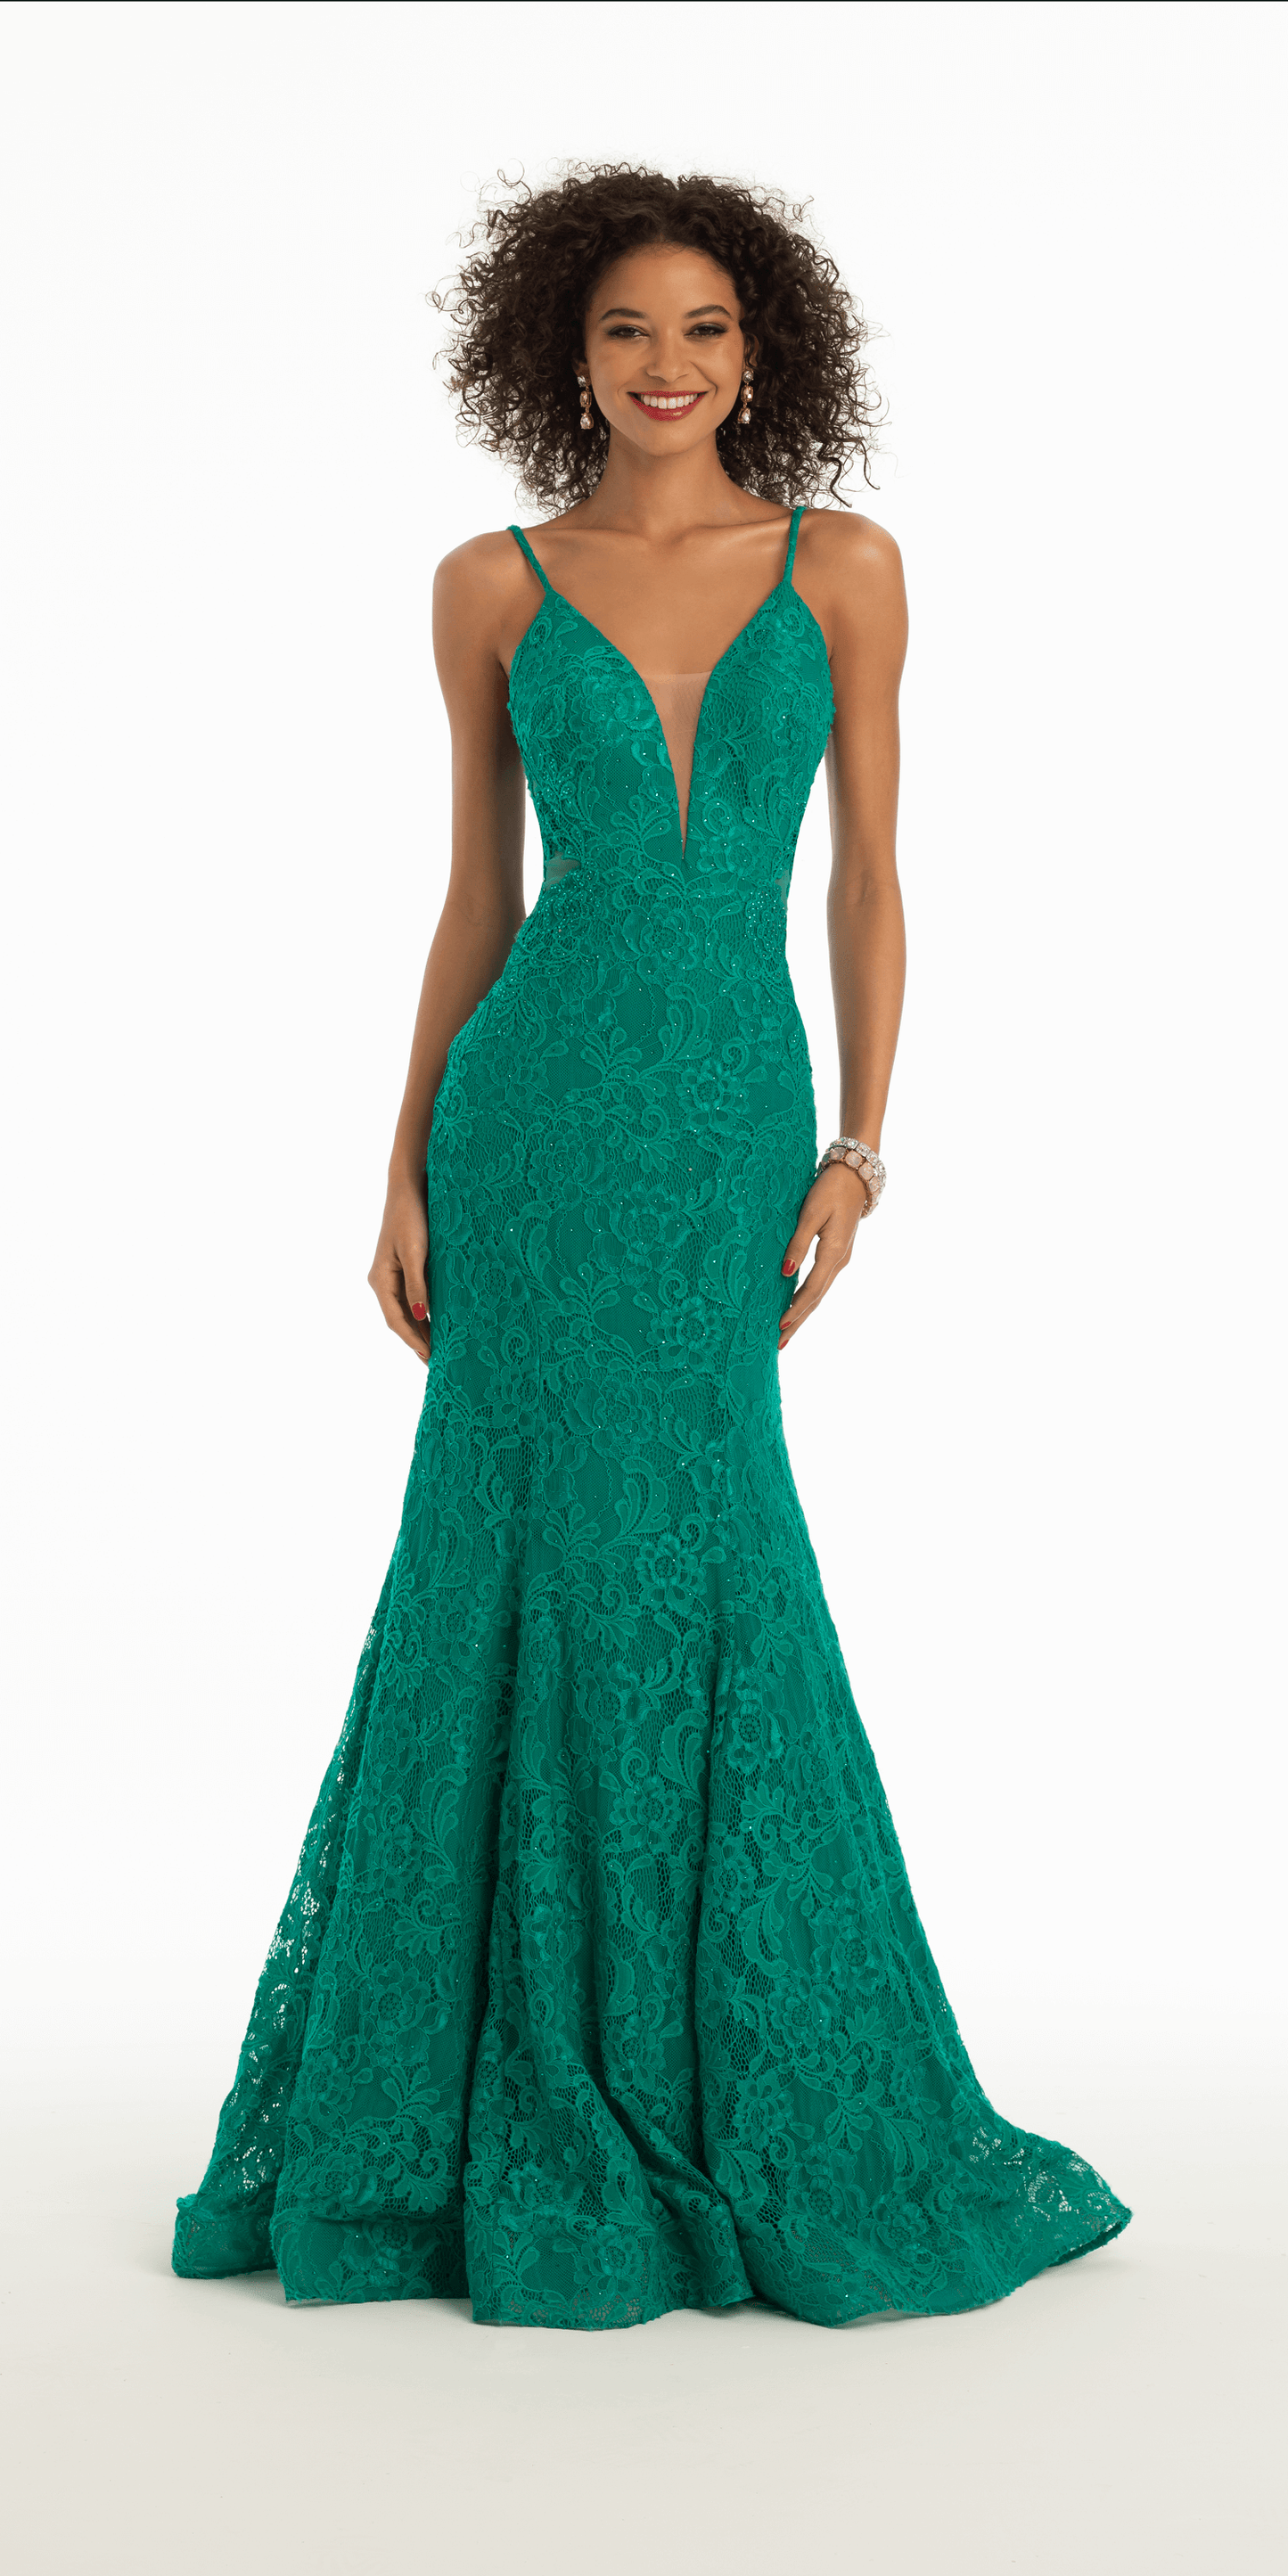 Camille La Vie Lace Plunge Mermaid Dress with Illusion Side Panels